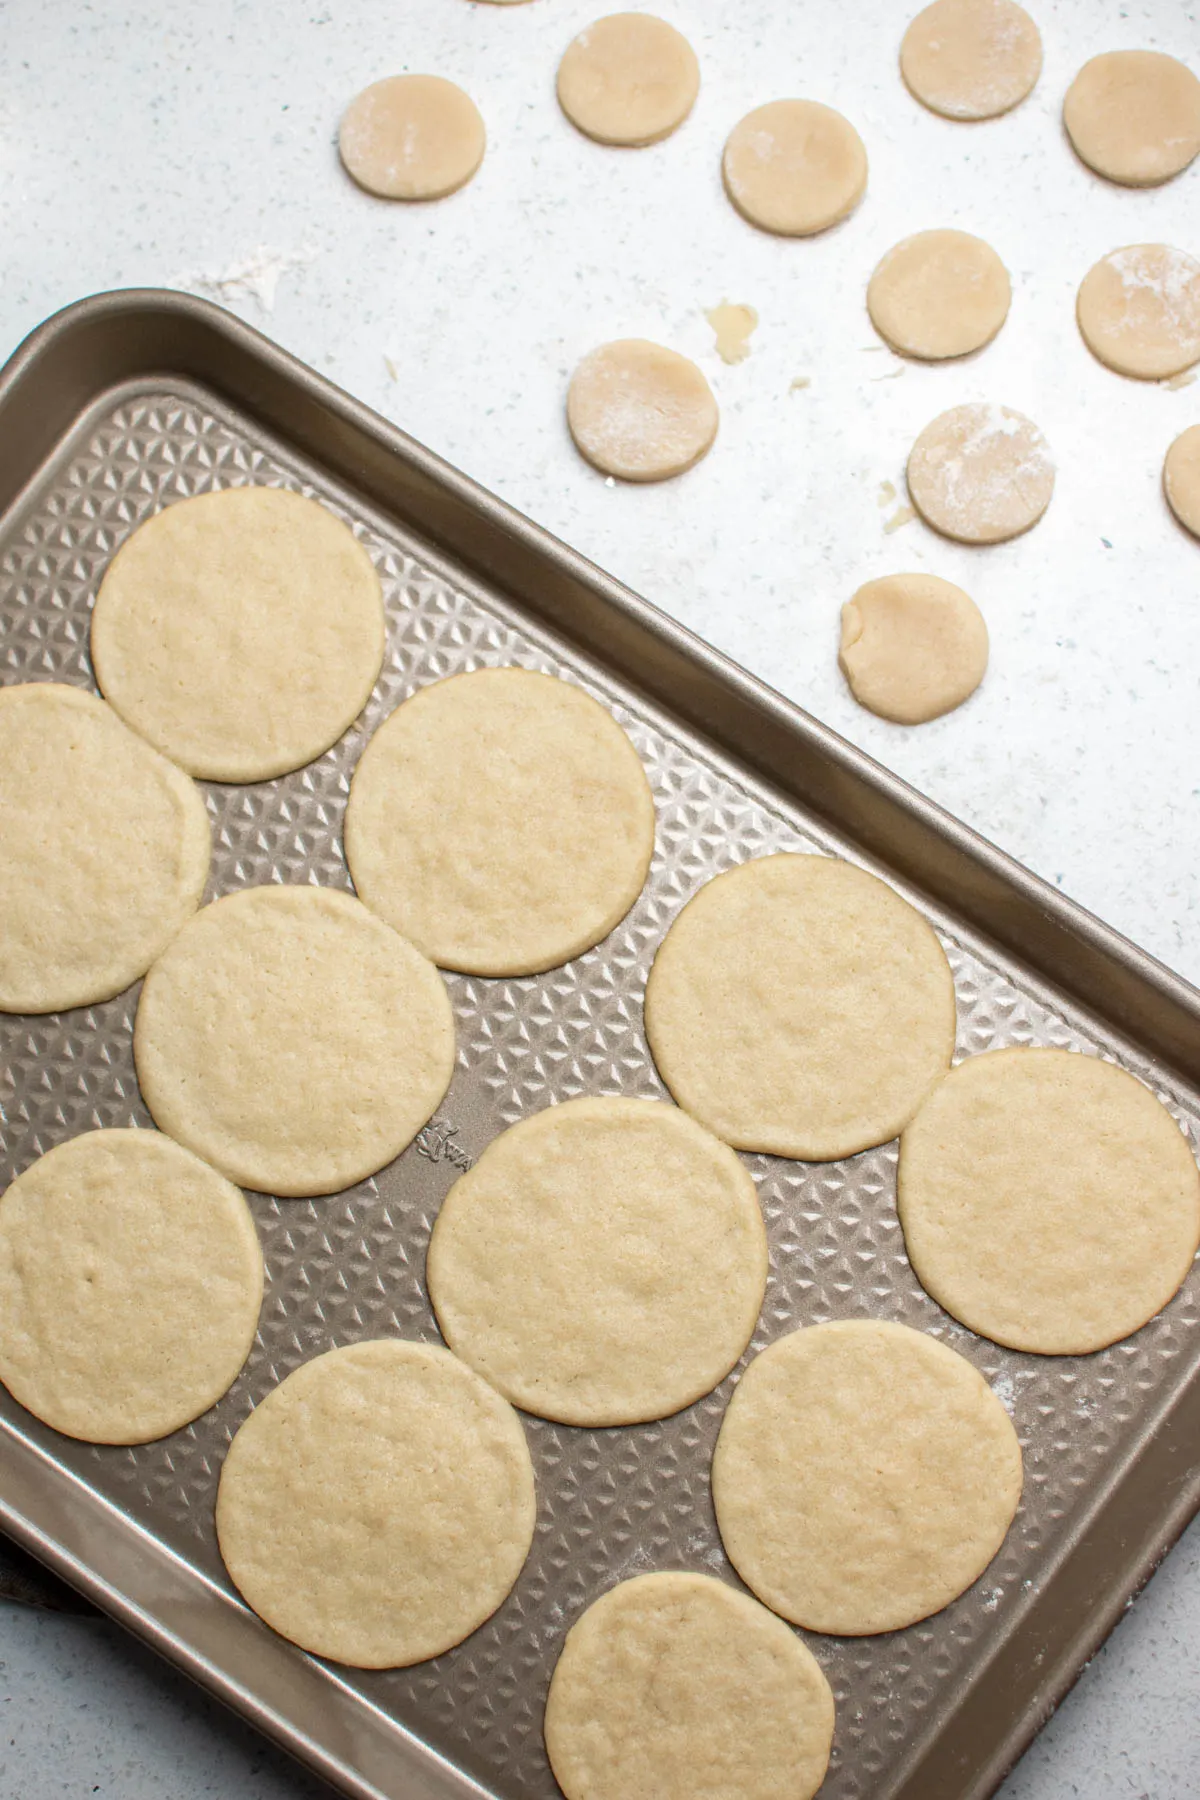 Cooked sugar cookies on baking sheet next to small dough circles on countertop.